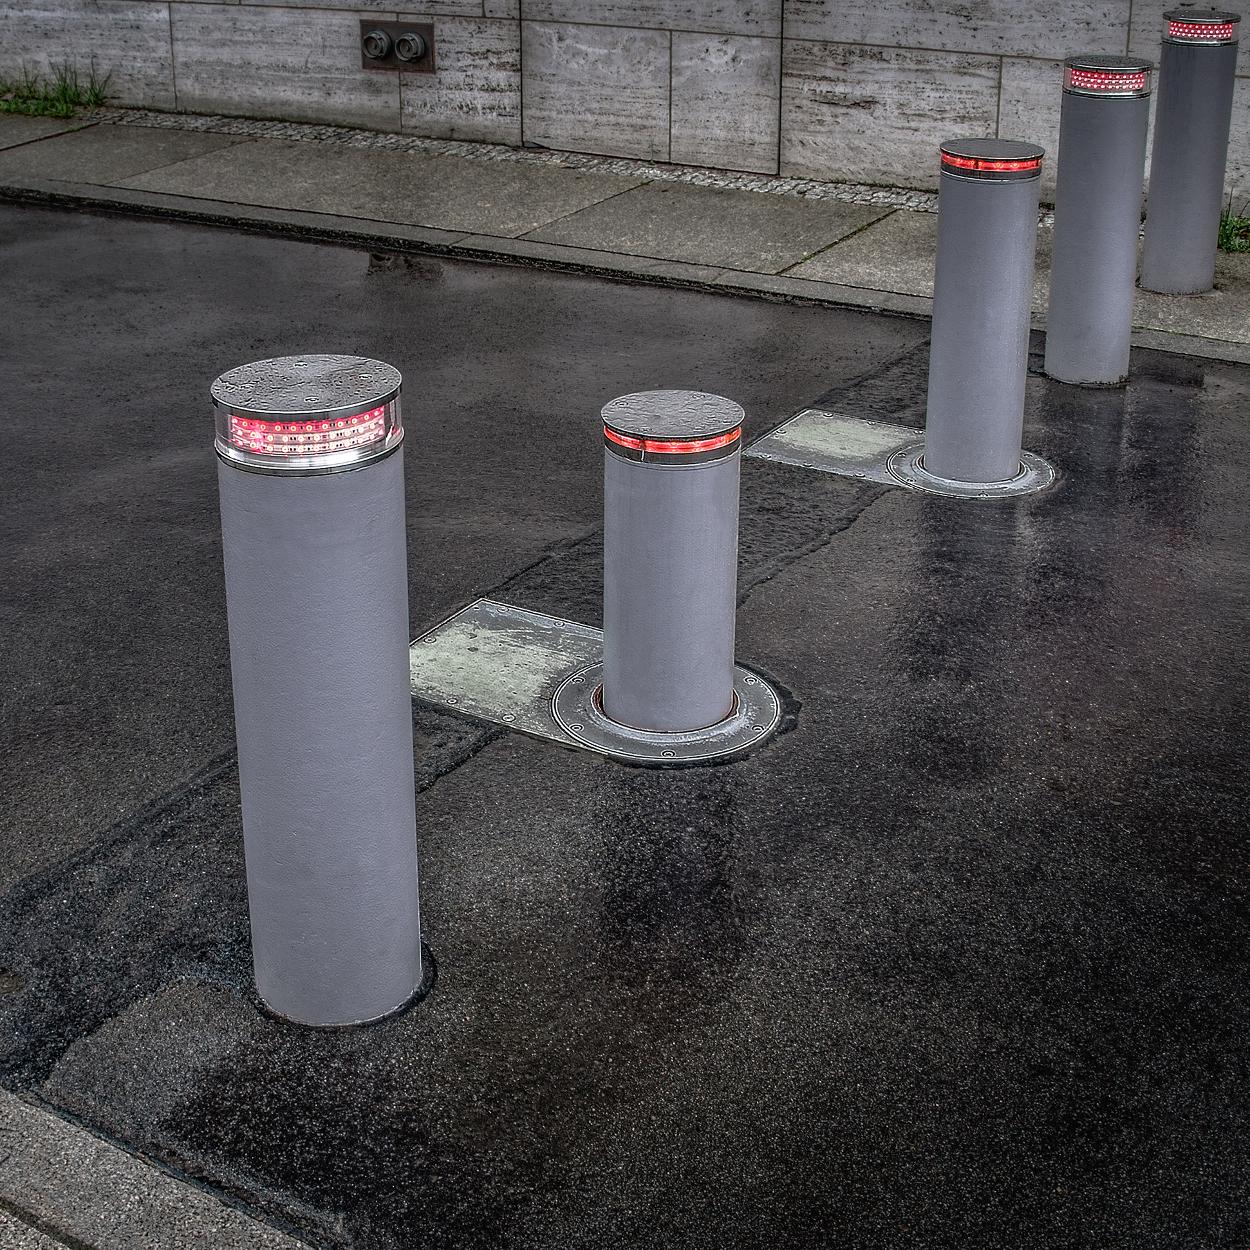 Electric automated road bollards